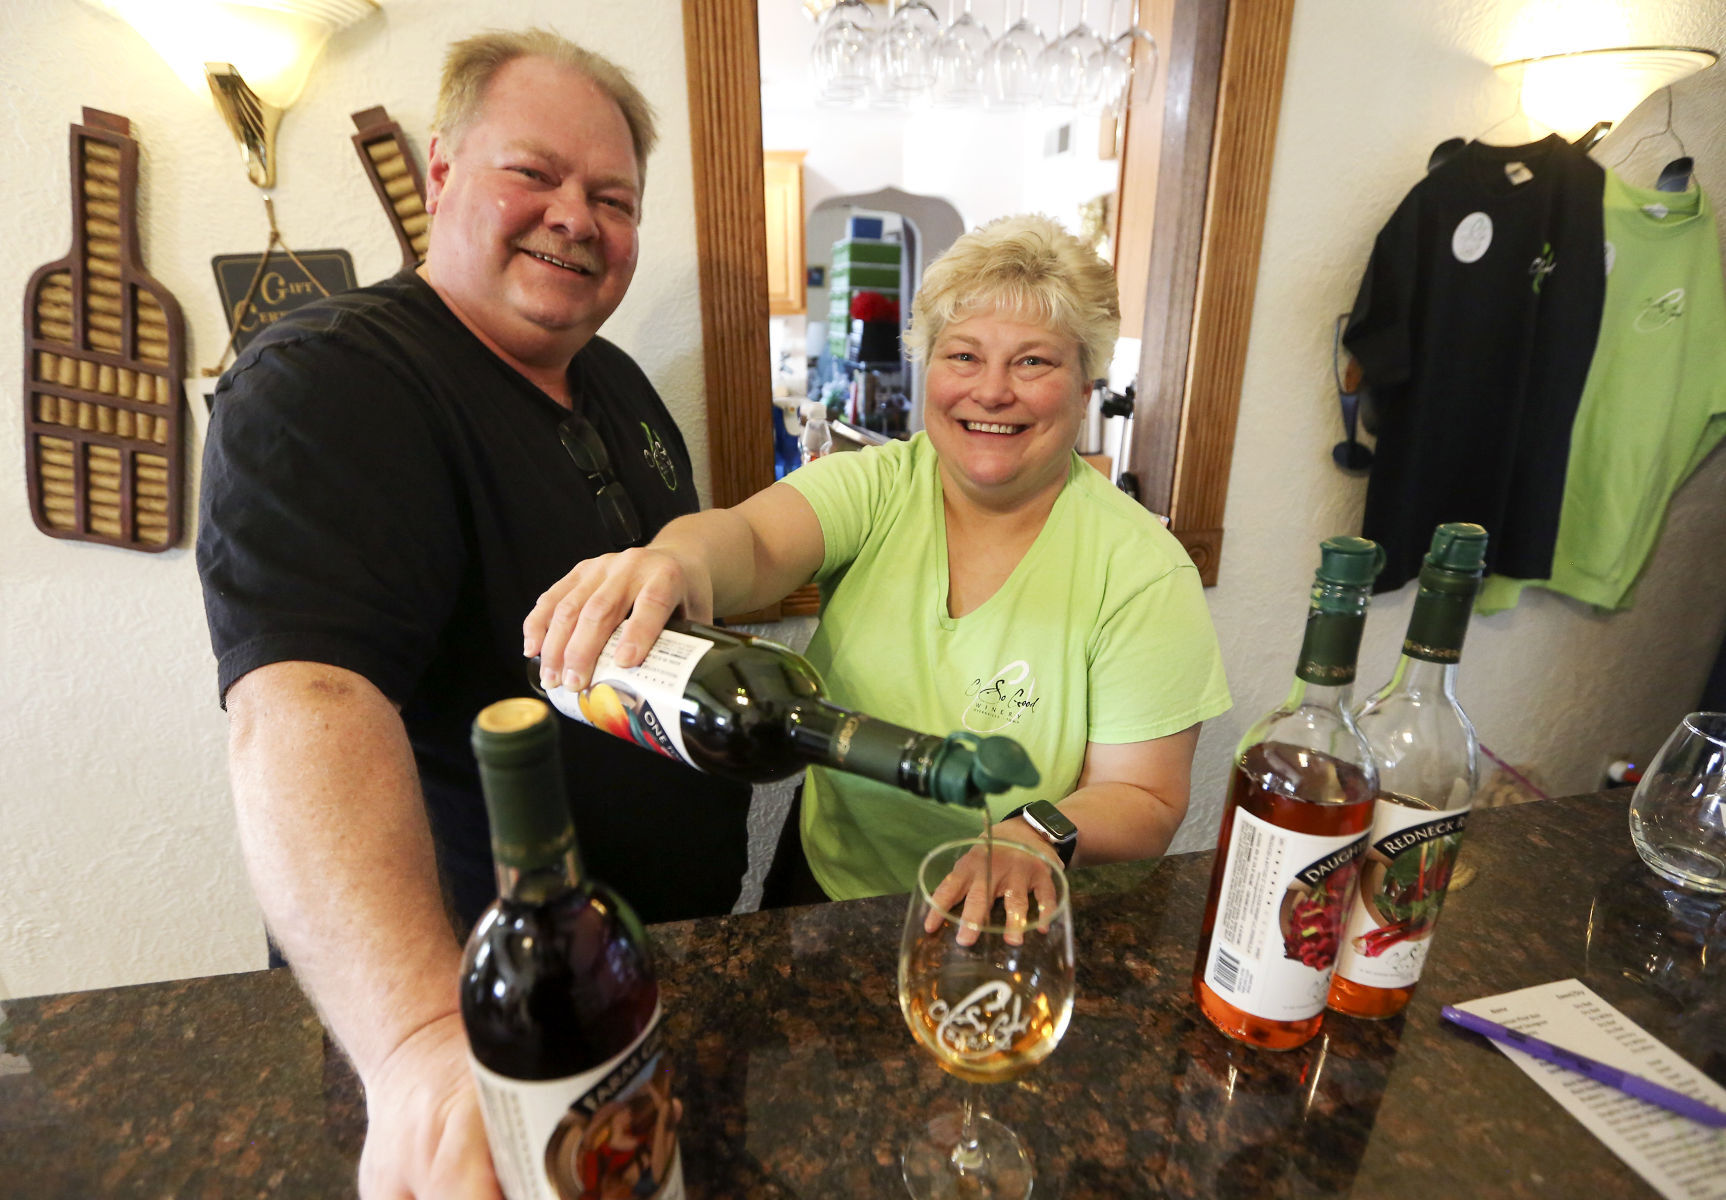 Lee and Karie Ostwinkle are co-owners of O So Good Winery in Dyersville, Iowa, which has marked its fifth anniversary. PHOTO CREDIT: NICKI KOHL